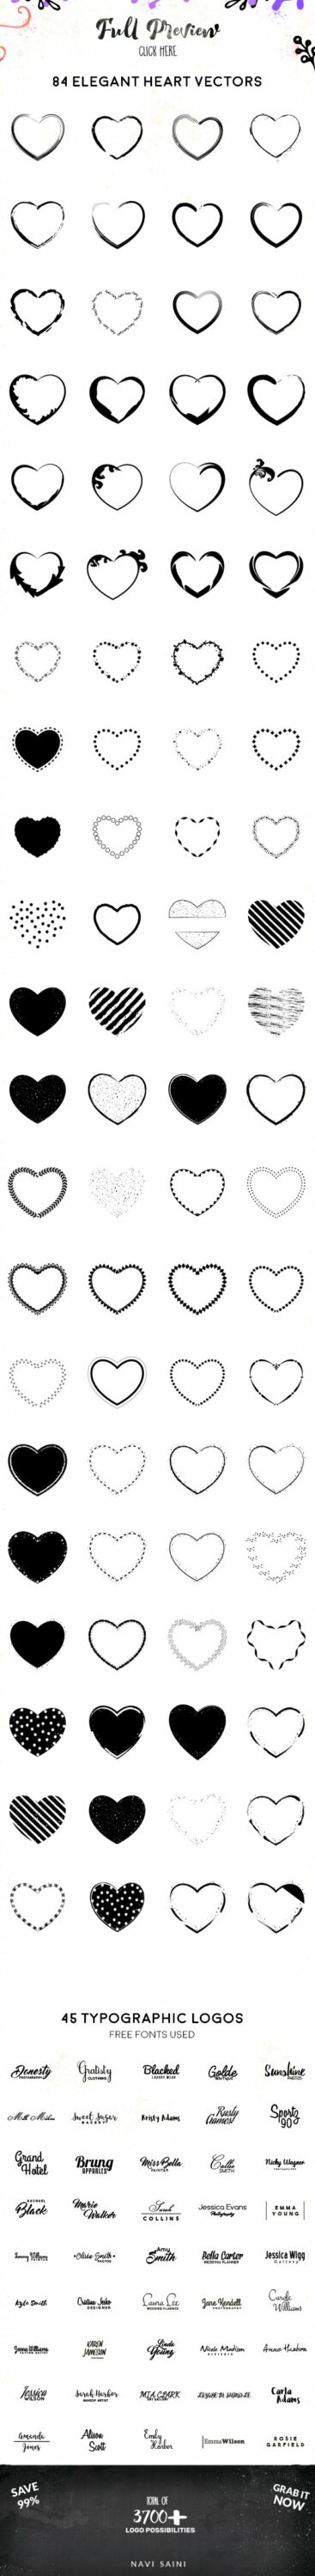 Heart vectors in black and white.